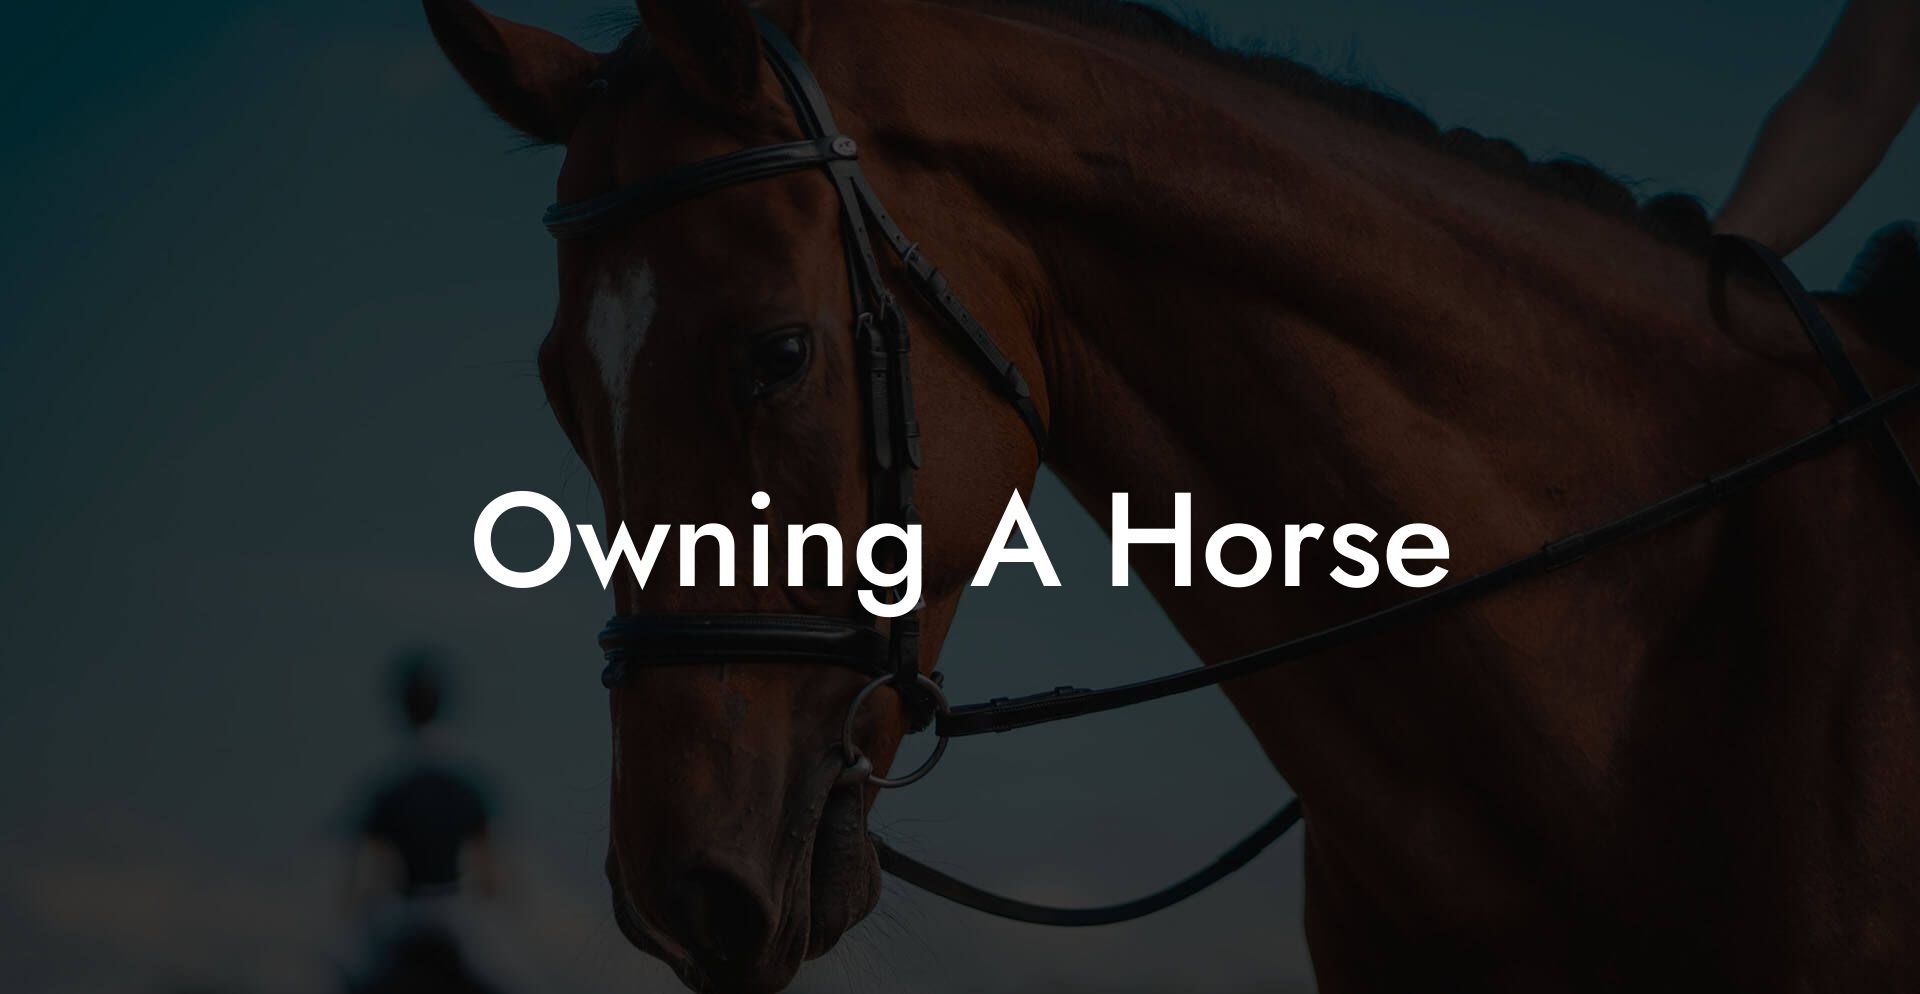 Owning A Horse - How To Own a Horse